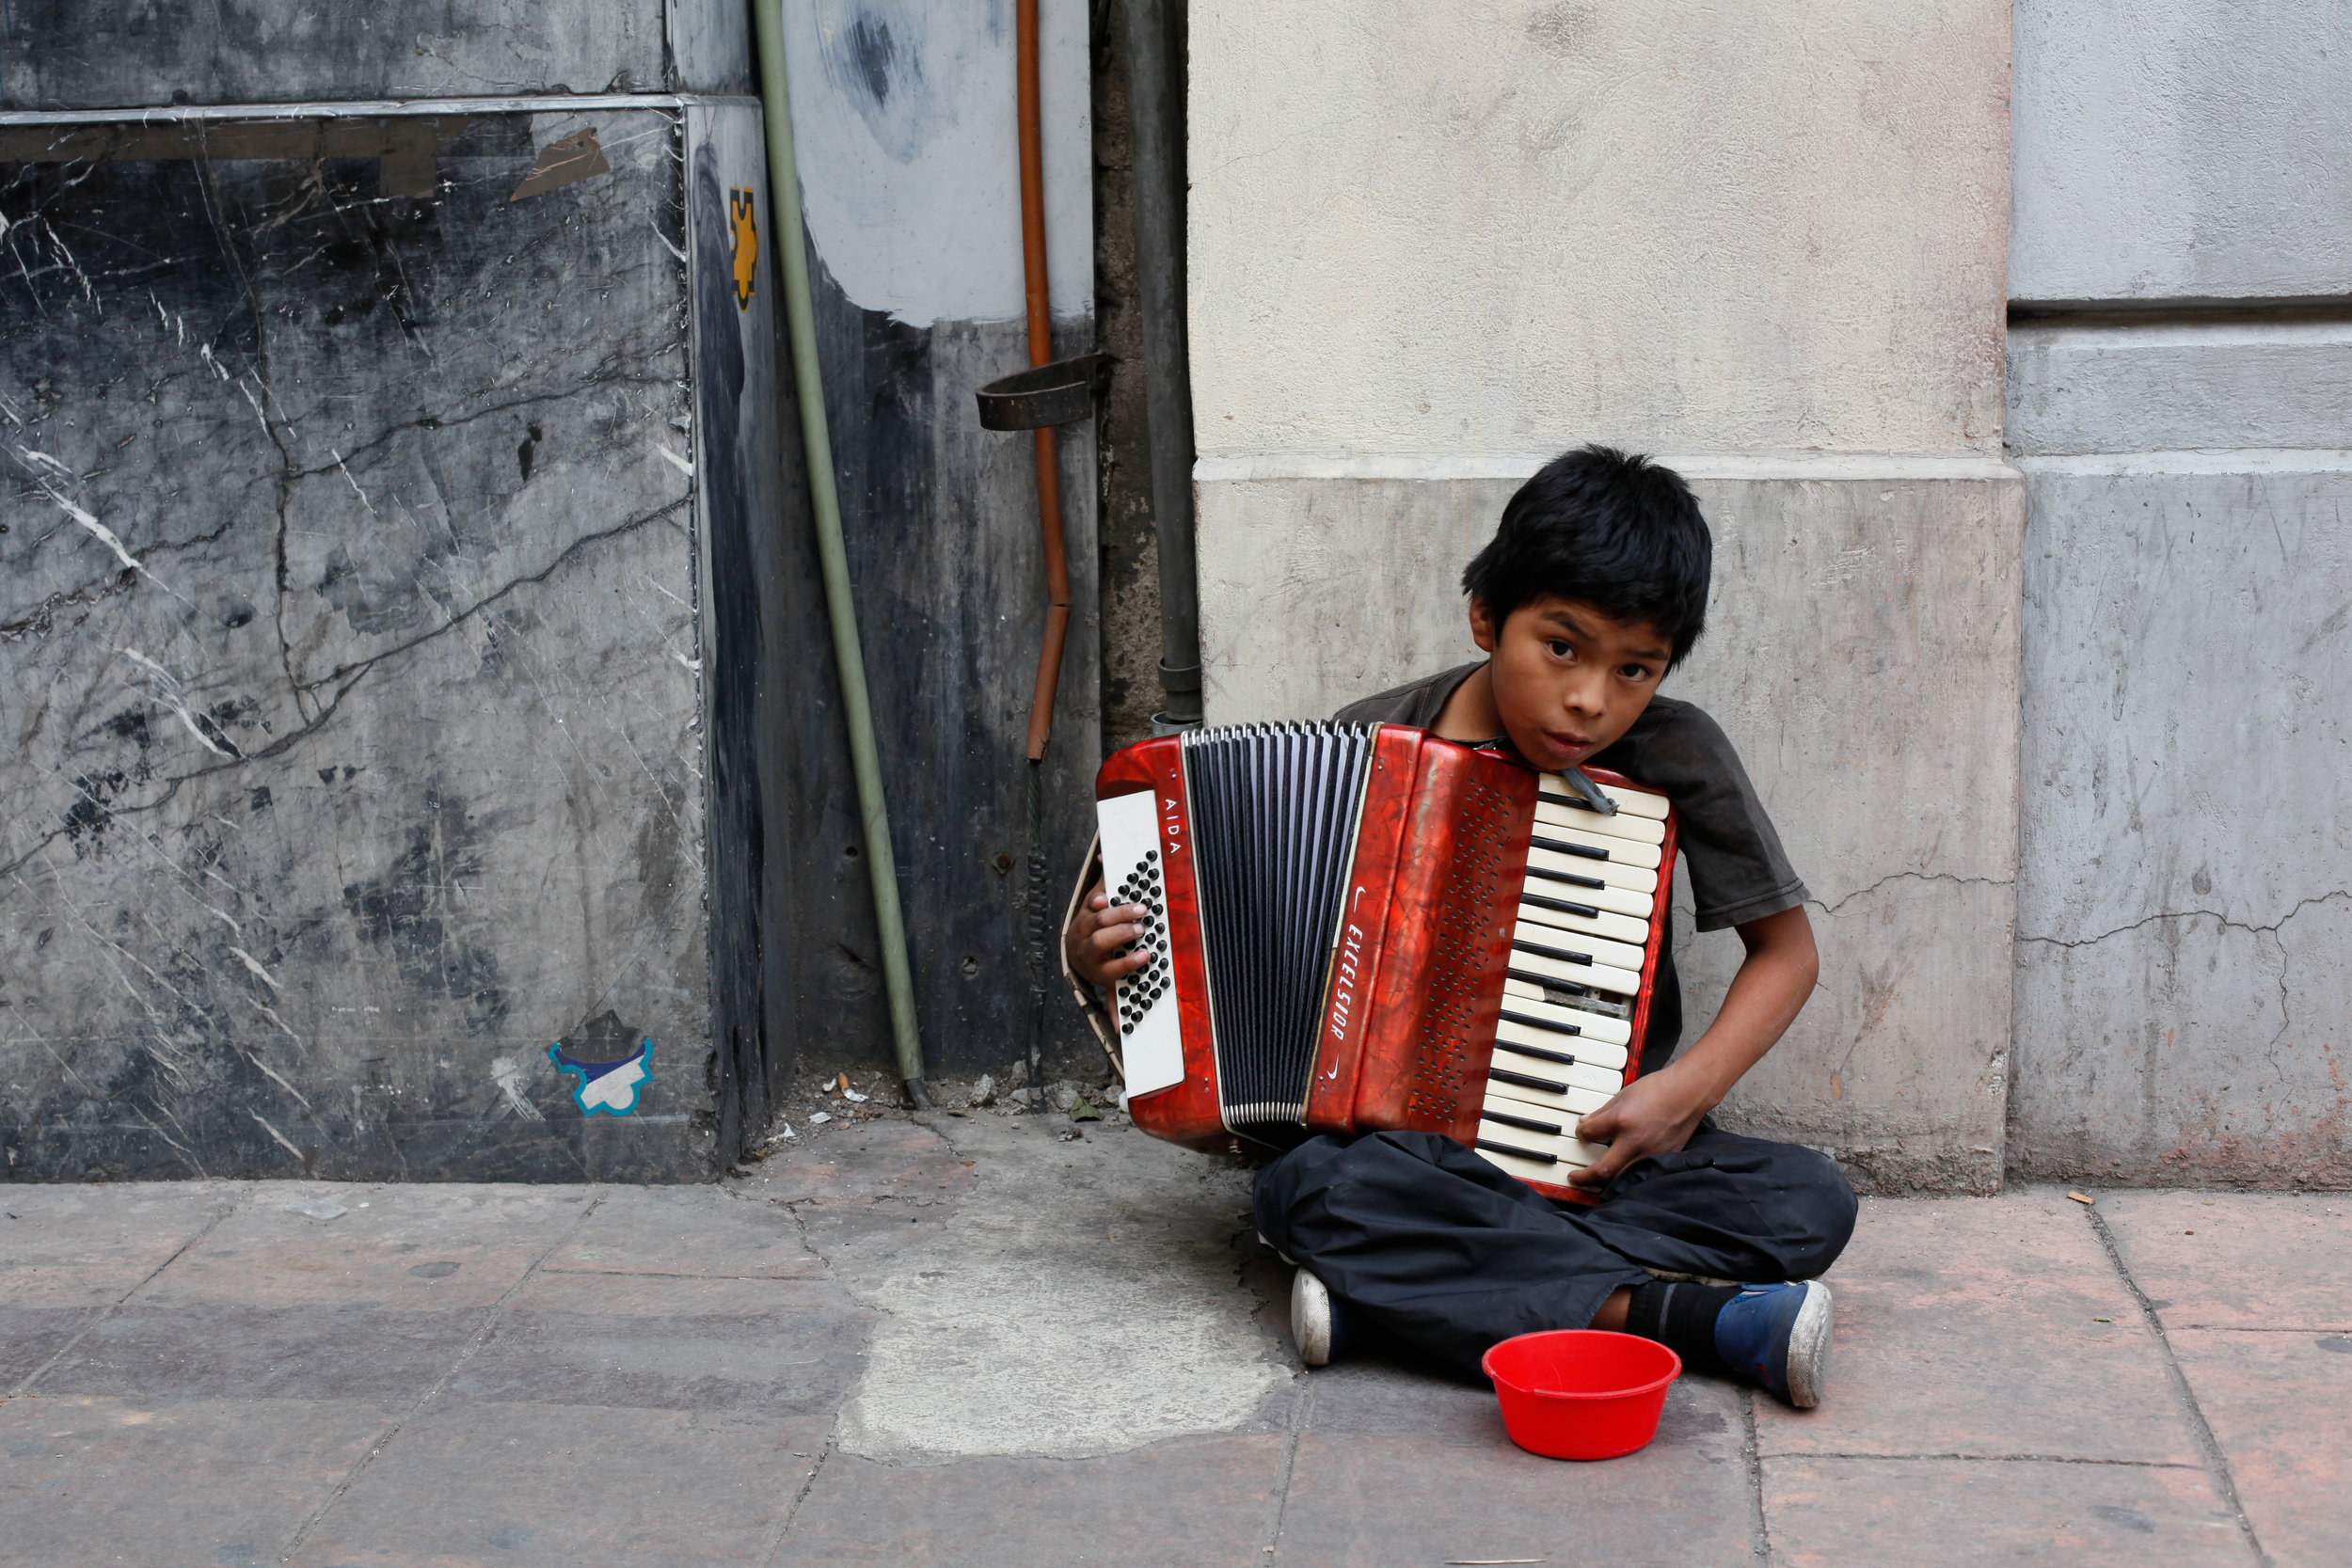 Mexican Child Portrait by Geraint Rowland on Flickr.com.